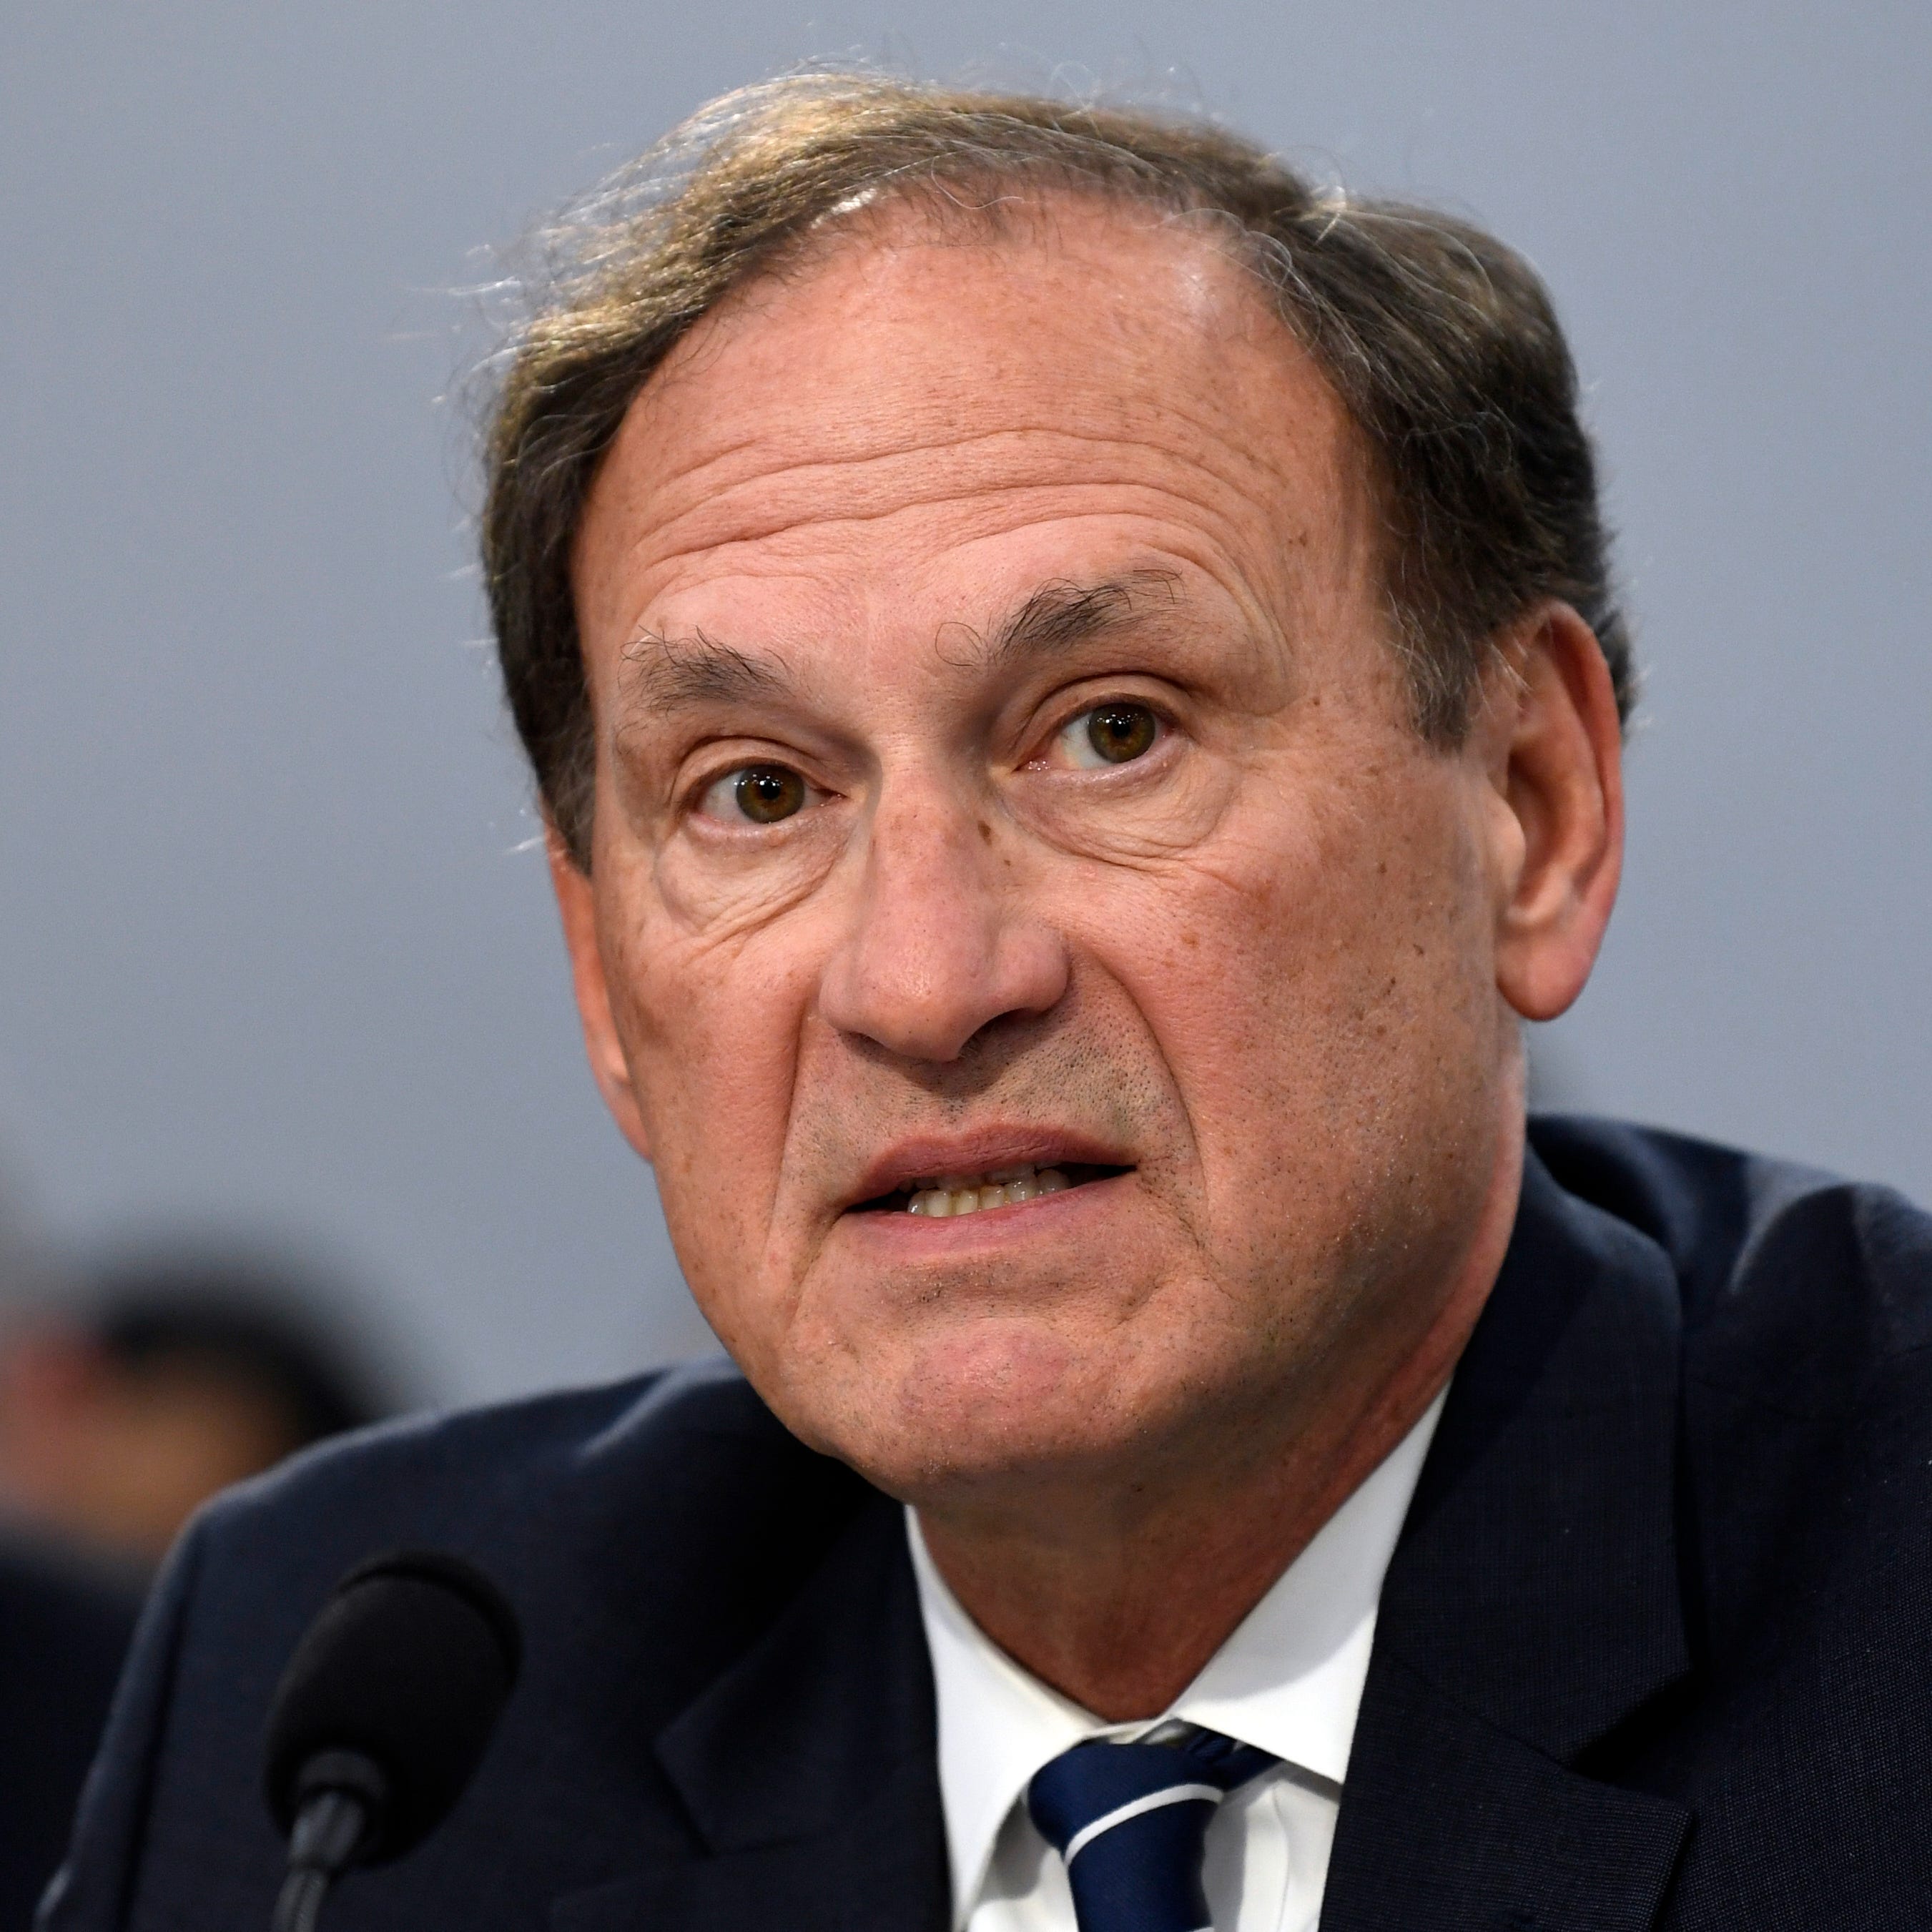 Associate Justice Samuel Alito, author of the Supreme Court's landmark opinion overturning Roe v. Wade, waved away criticism of the ruling from foreign leaders in remarks in July 2022 at a religious summit in Rome.